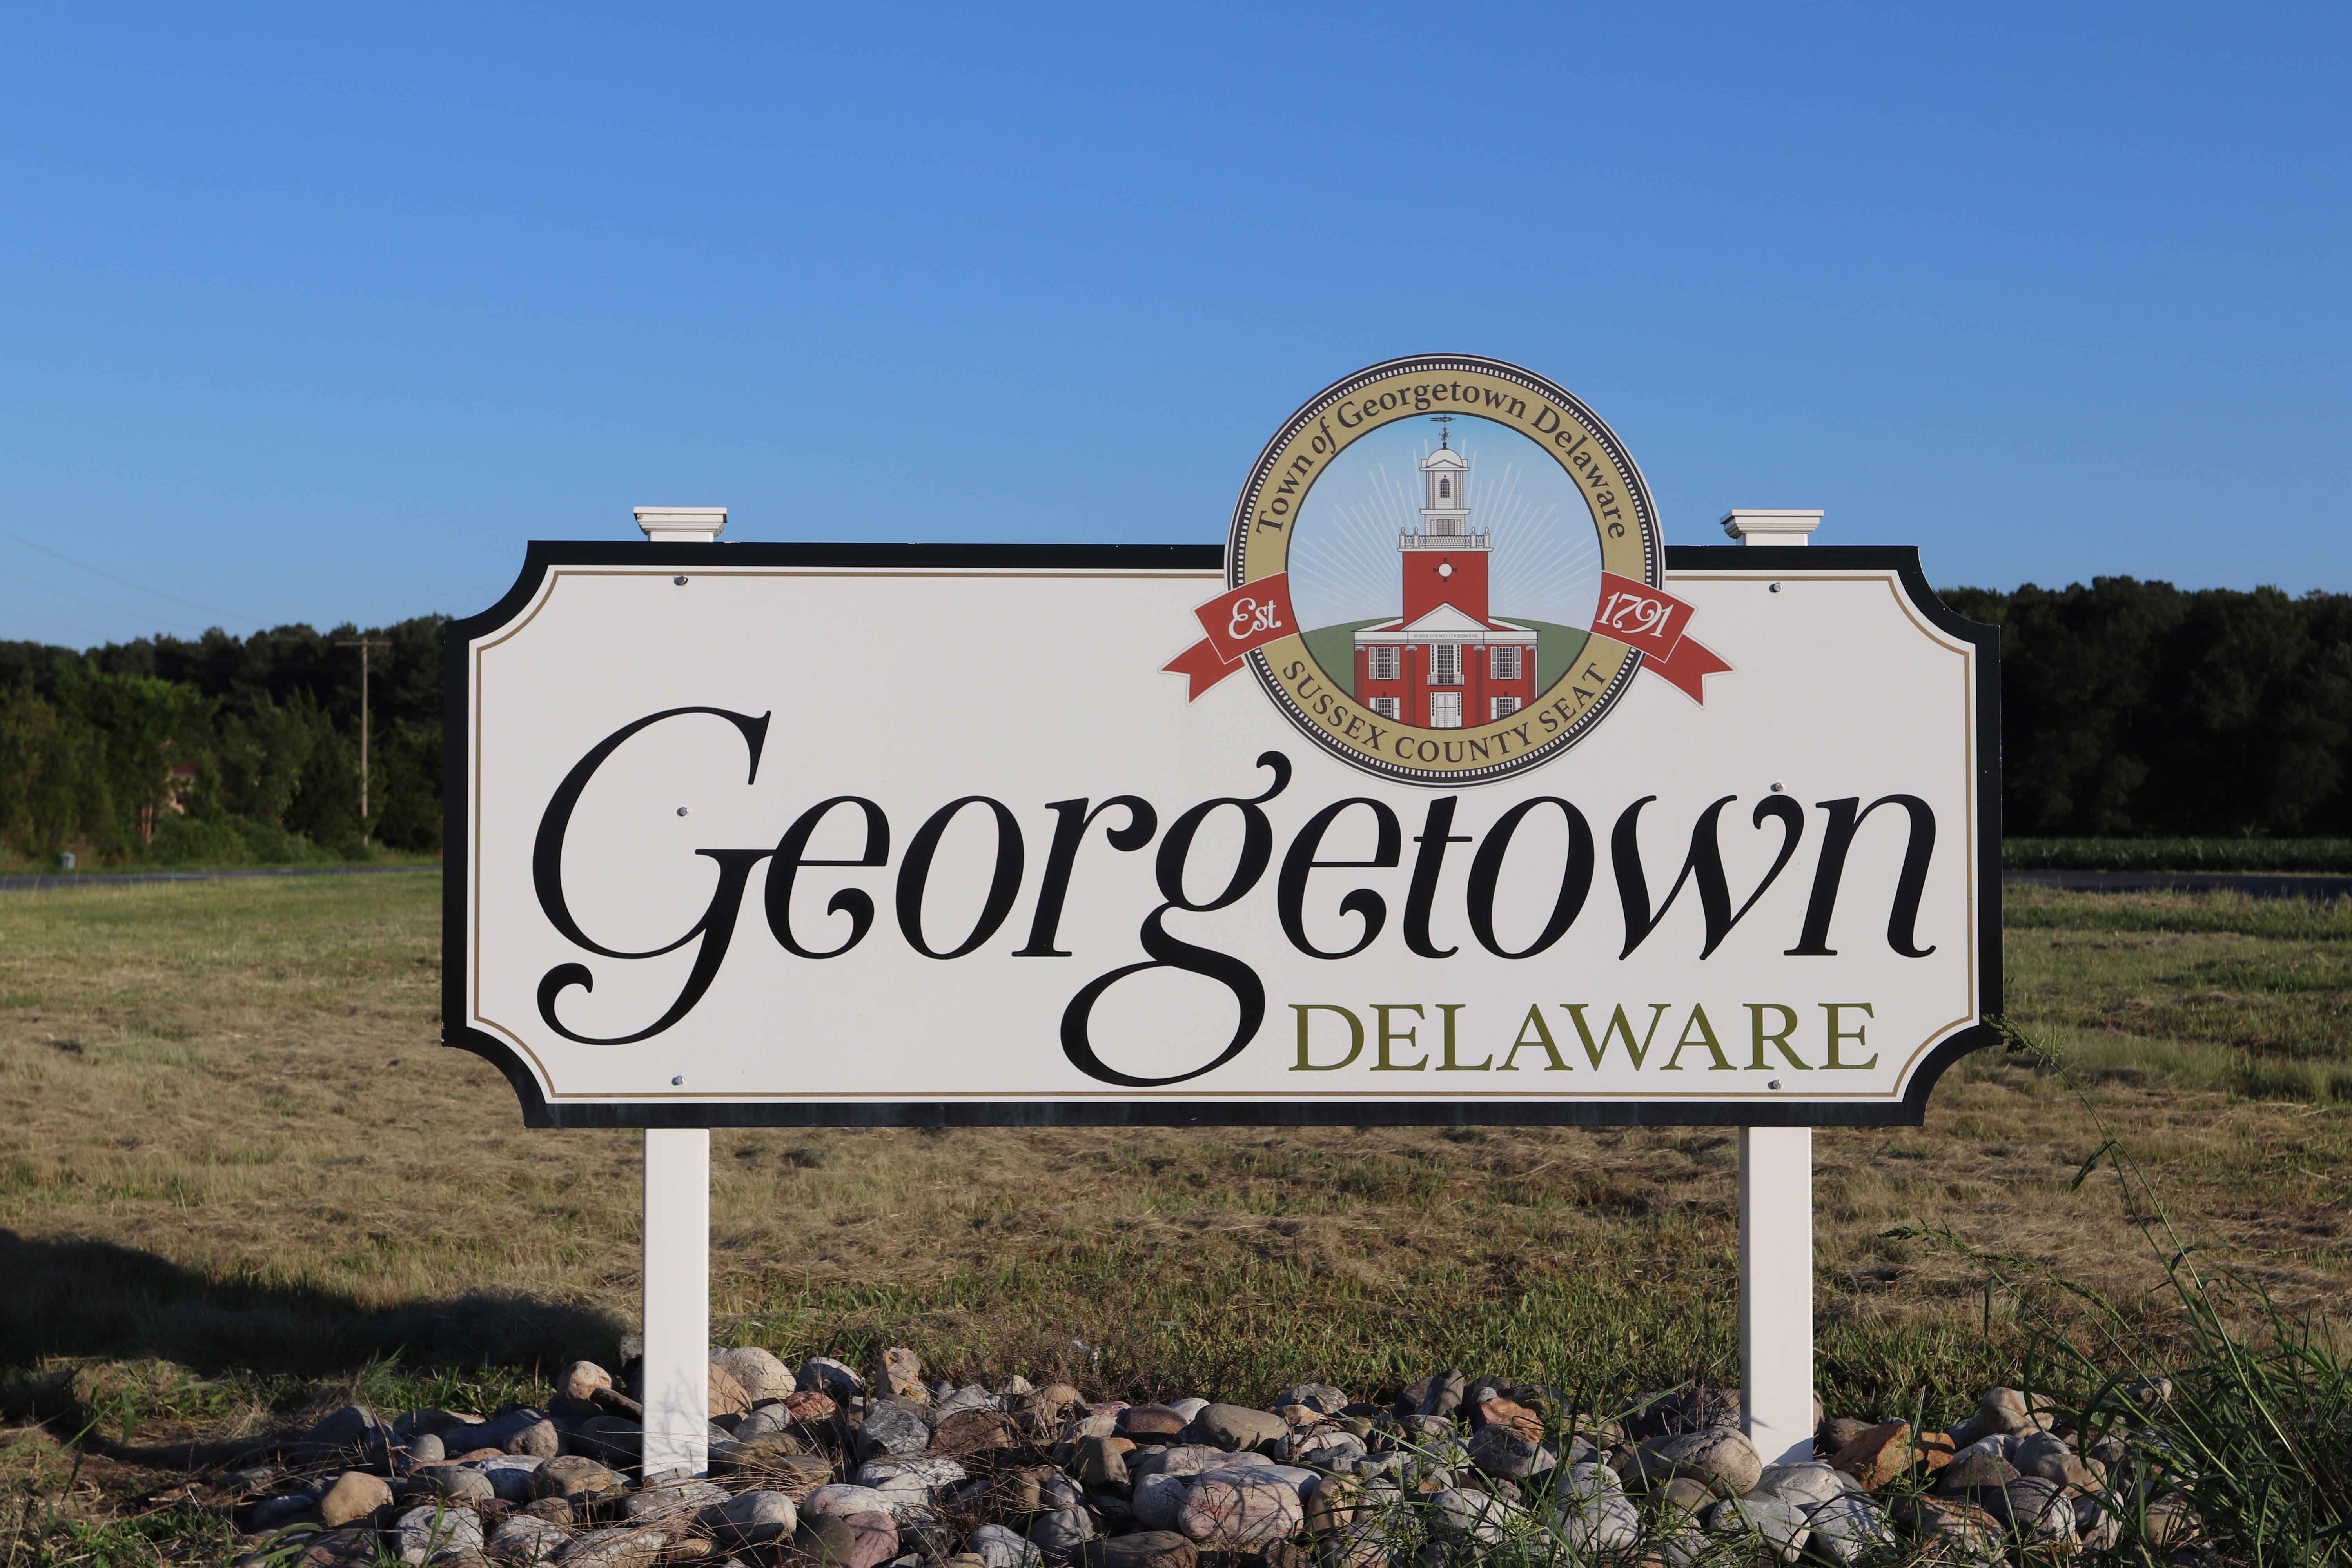 Welcome to Georgetown Delaware